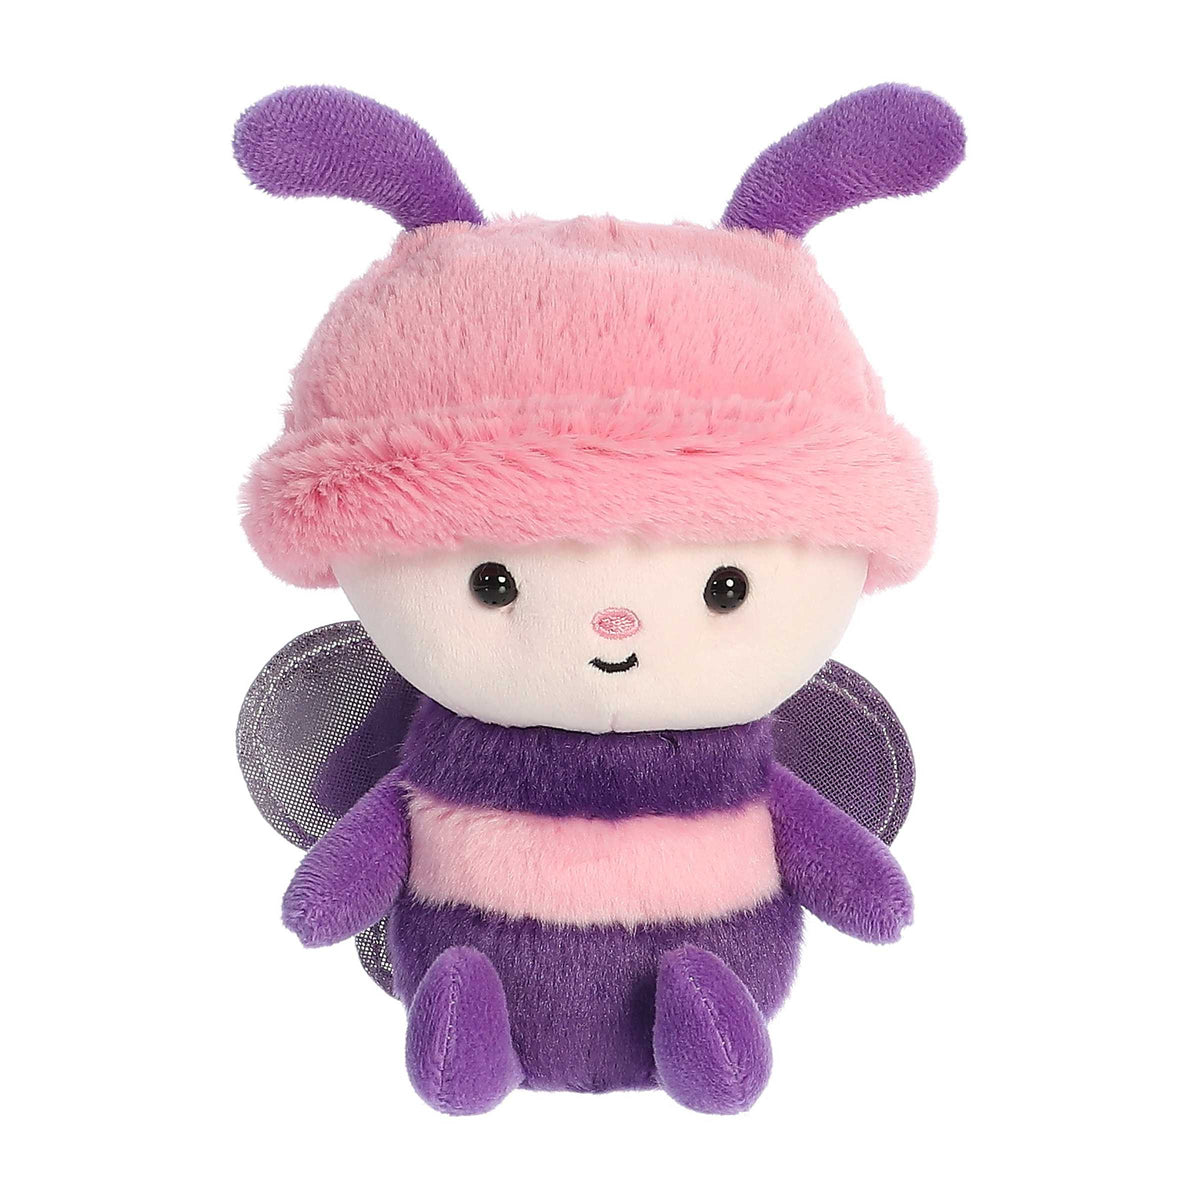 Bebe Bugs Butterfly from Aurora's Spring Collection, adorable plush in charming purple and pink with playful mesh wings